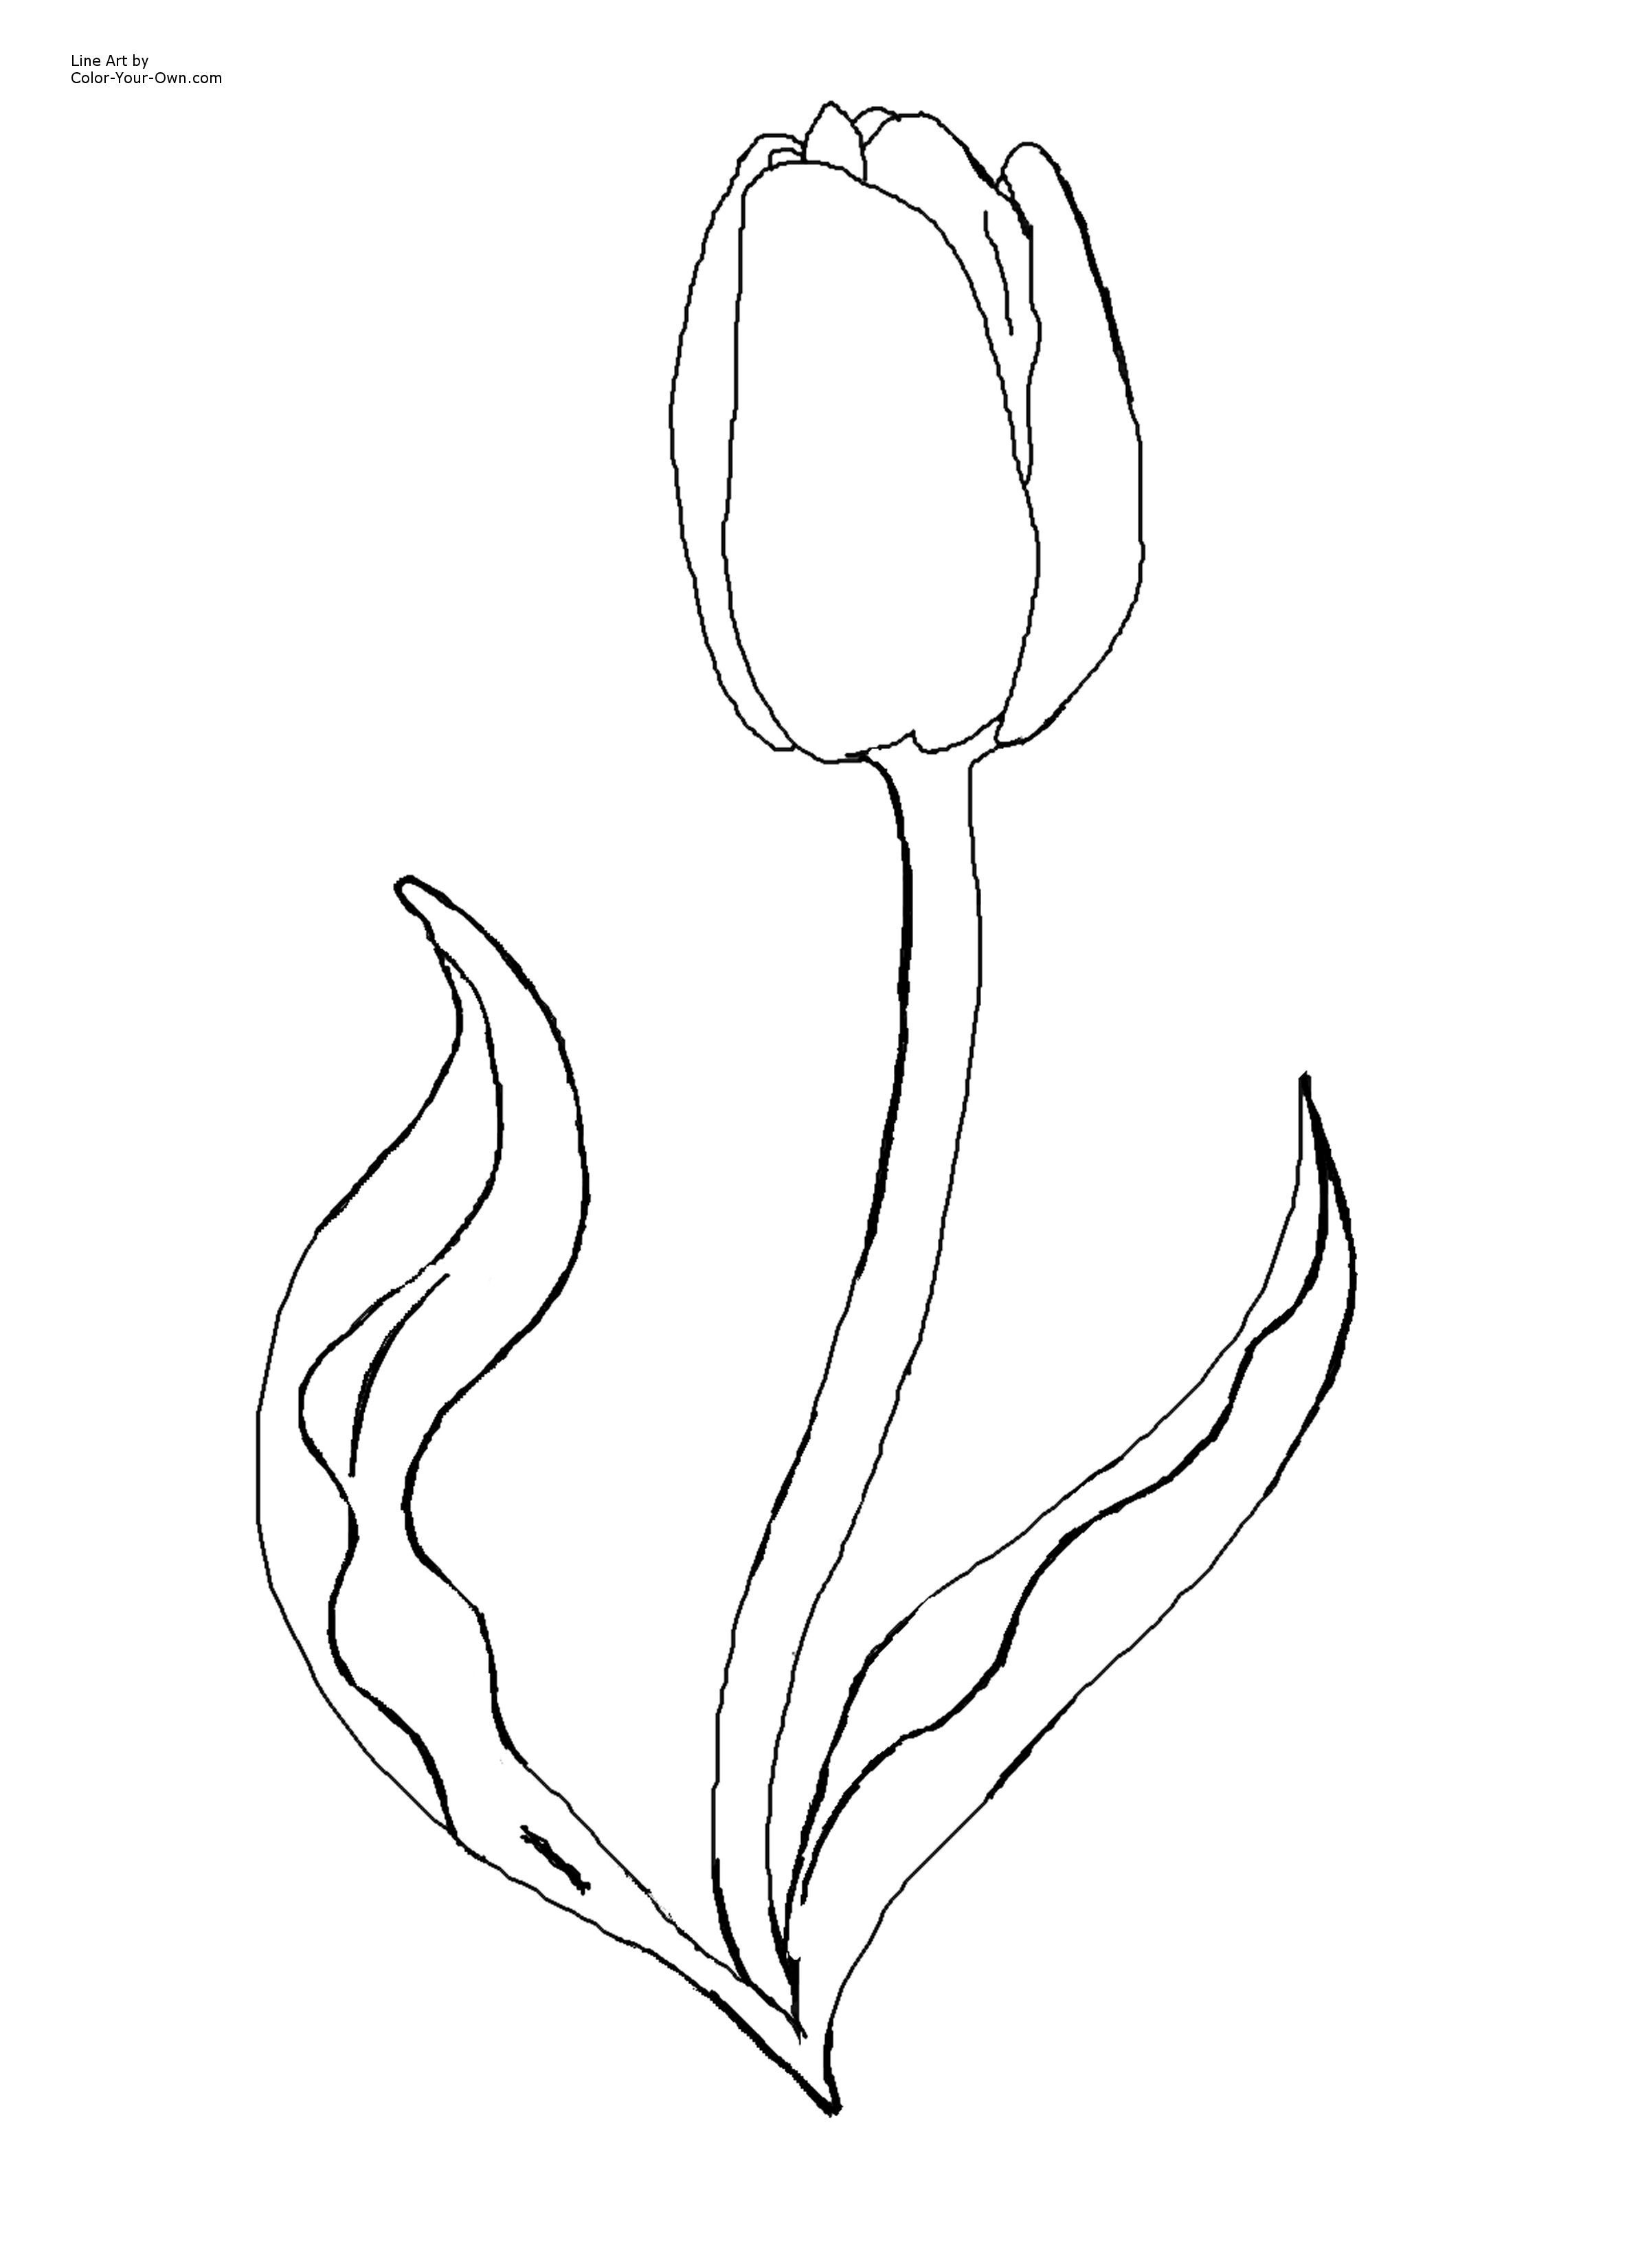 Flower Page Printable Coloring Sheets | Spring Flowers Coloring - Free Printable Tulip Coloring Pages